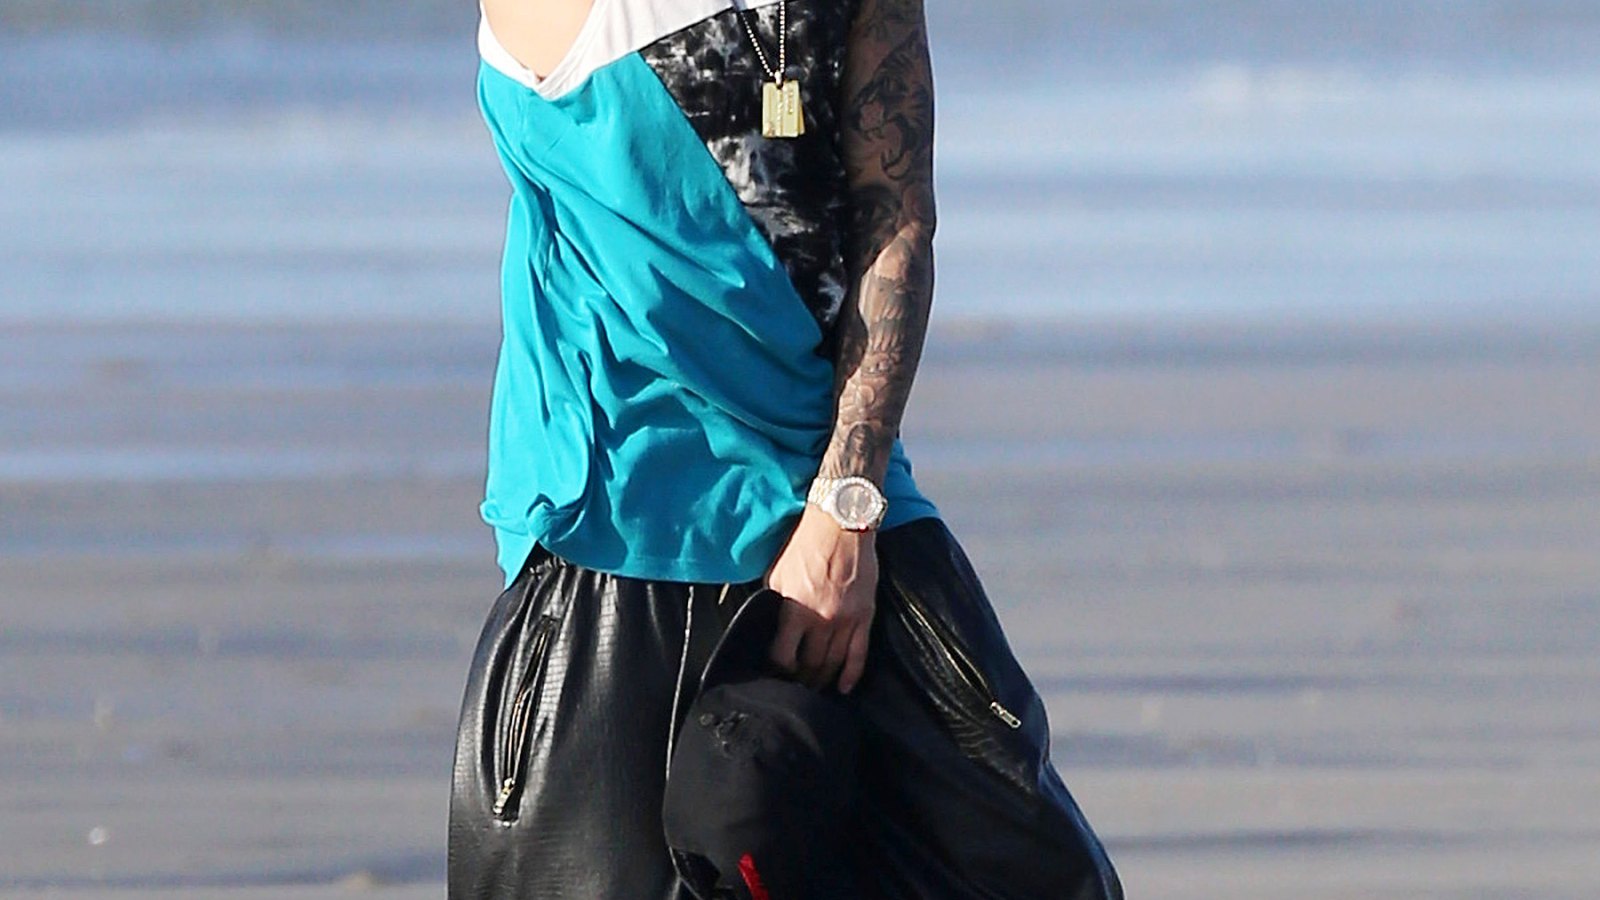 Justin Bieber filming a music video on the beach in Panama